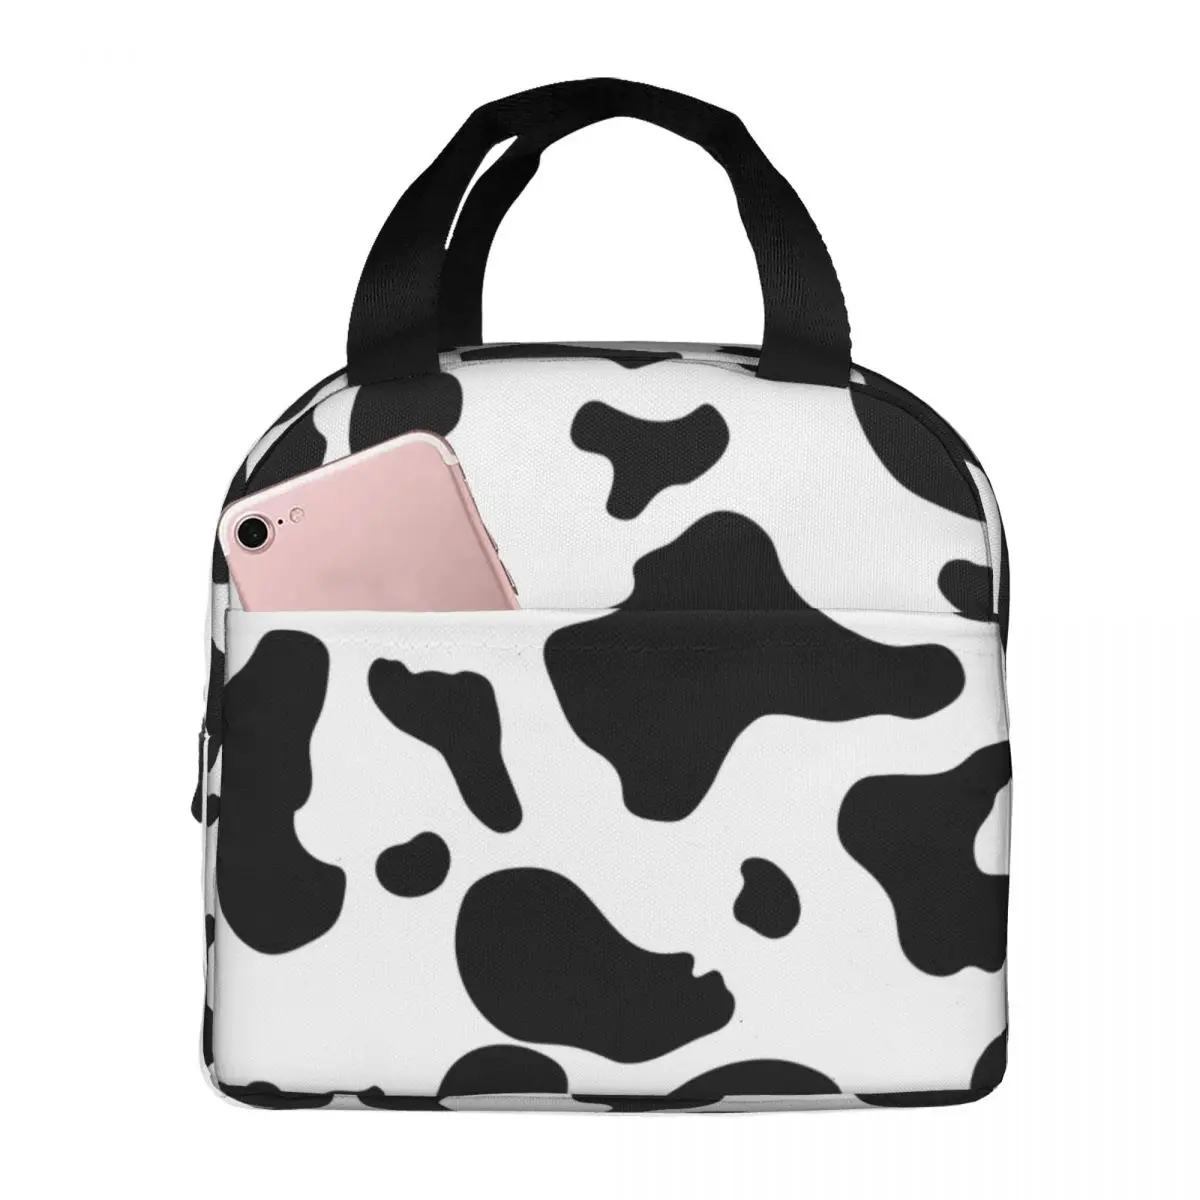 Lunch Bag for Women Kids Cow Pattern Insulated Cooler Bags Waterproof Picnic Animal Canvas Lunch Box Bento Pouch